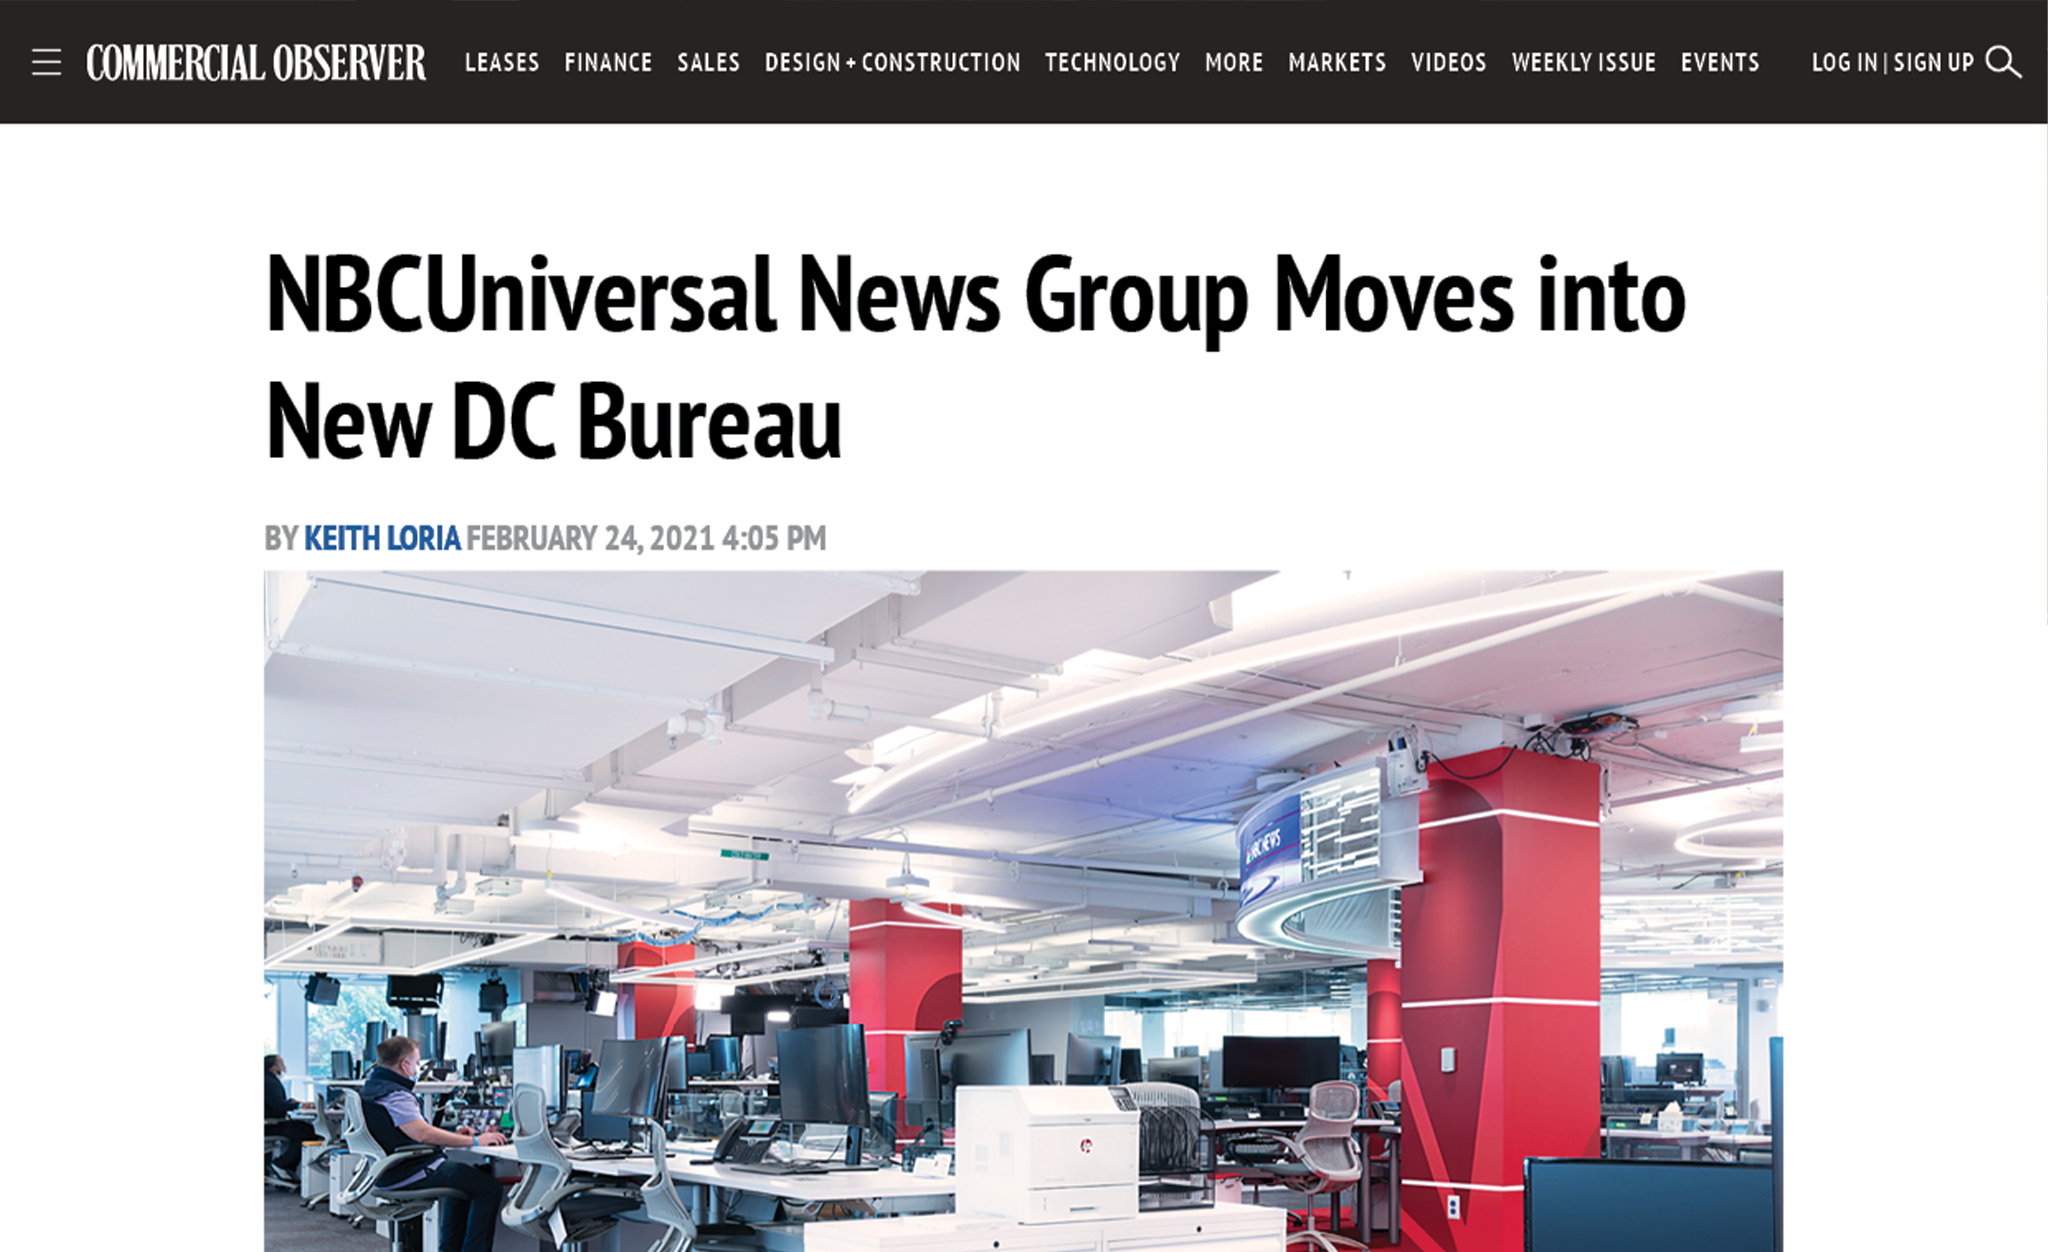 NBCUniversal News Group Moves into New DC Bureau | The Commercial Observer